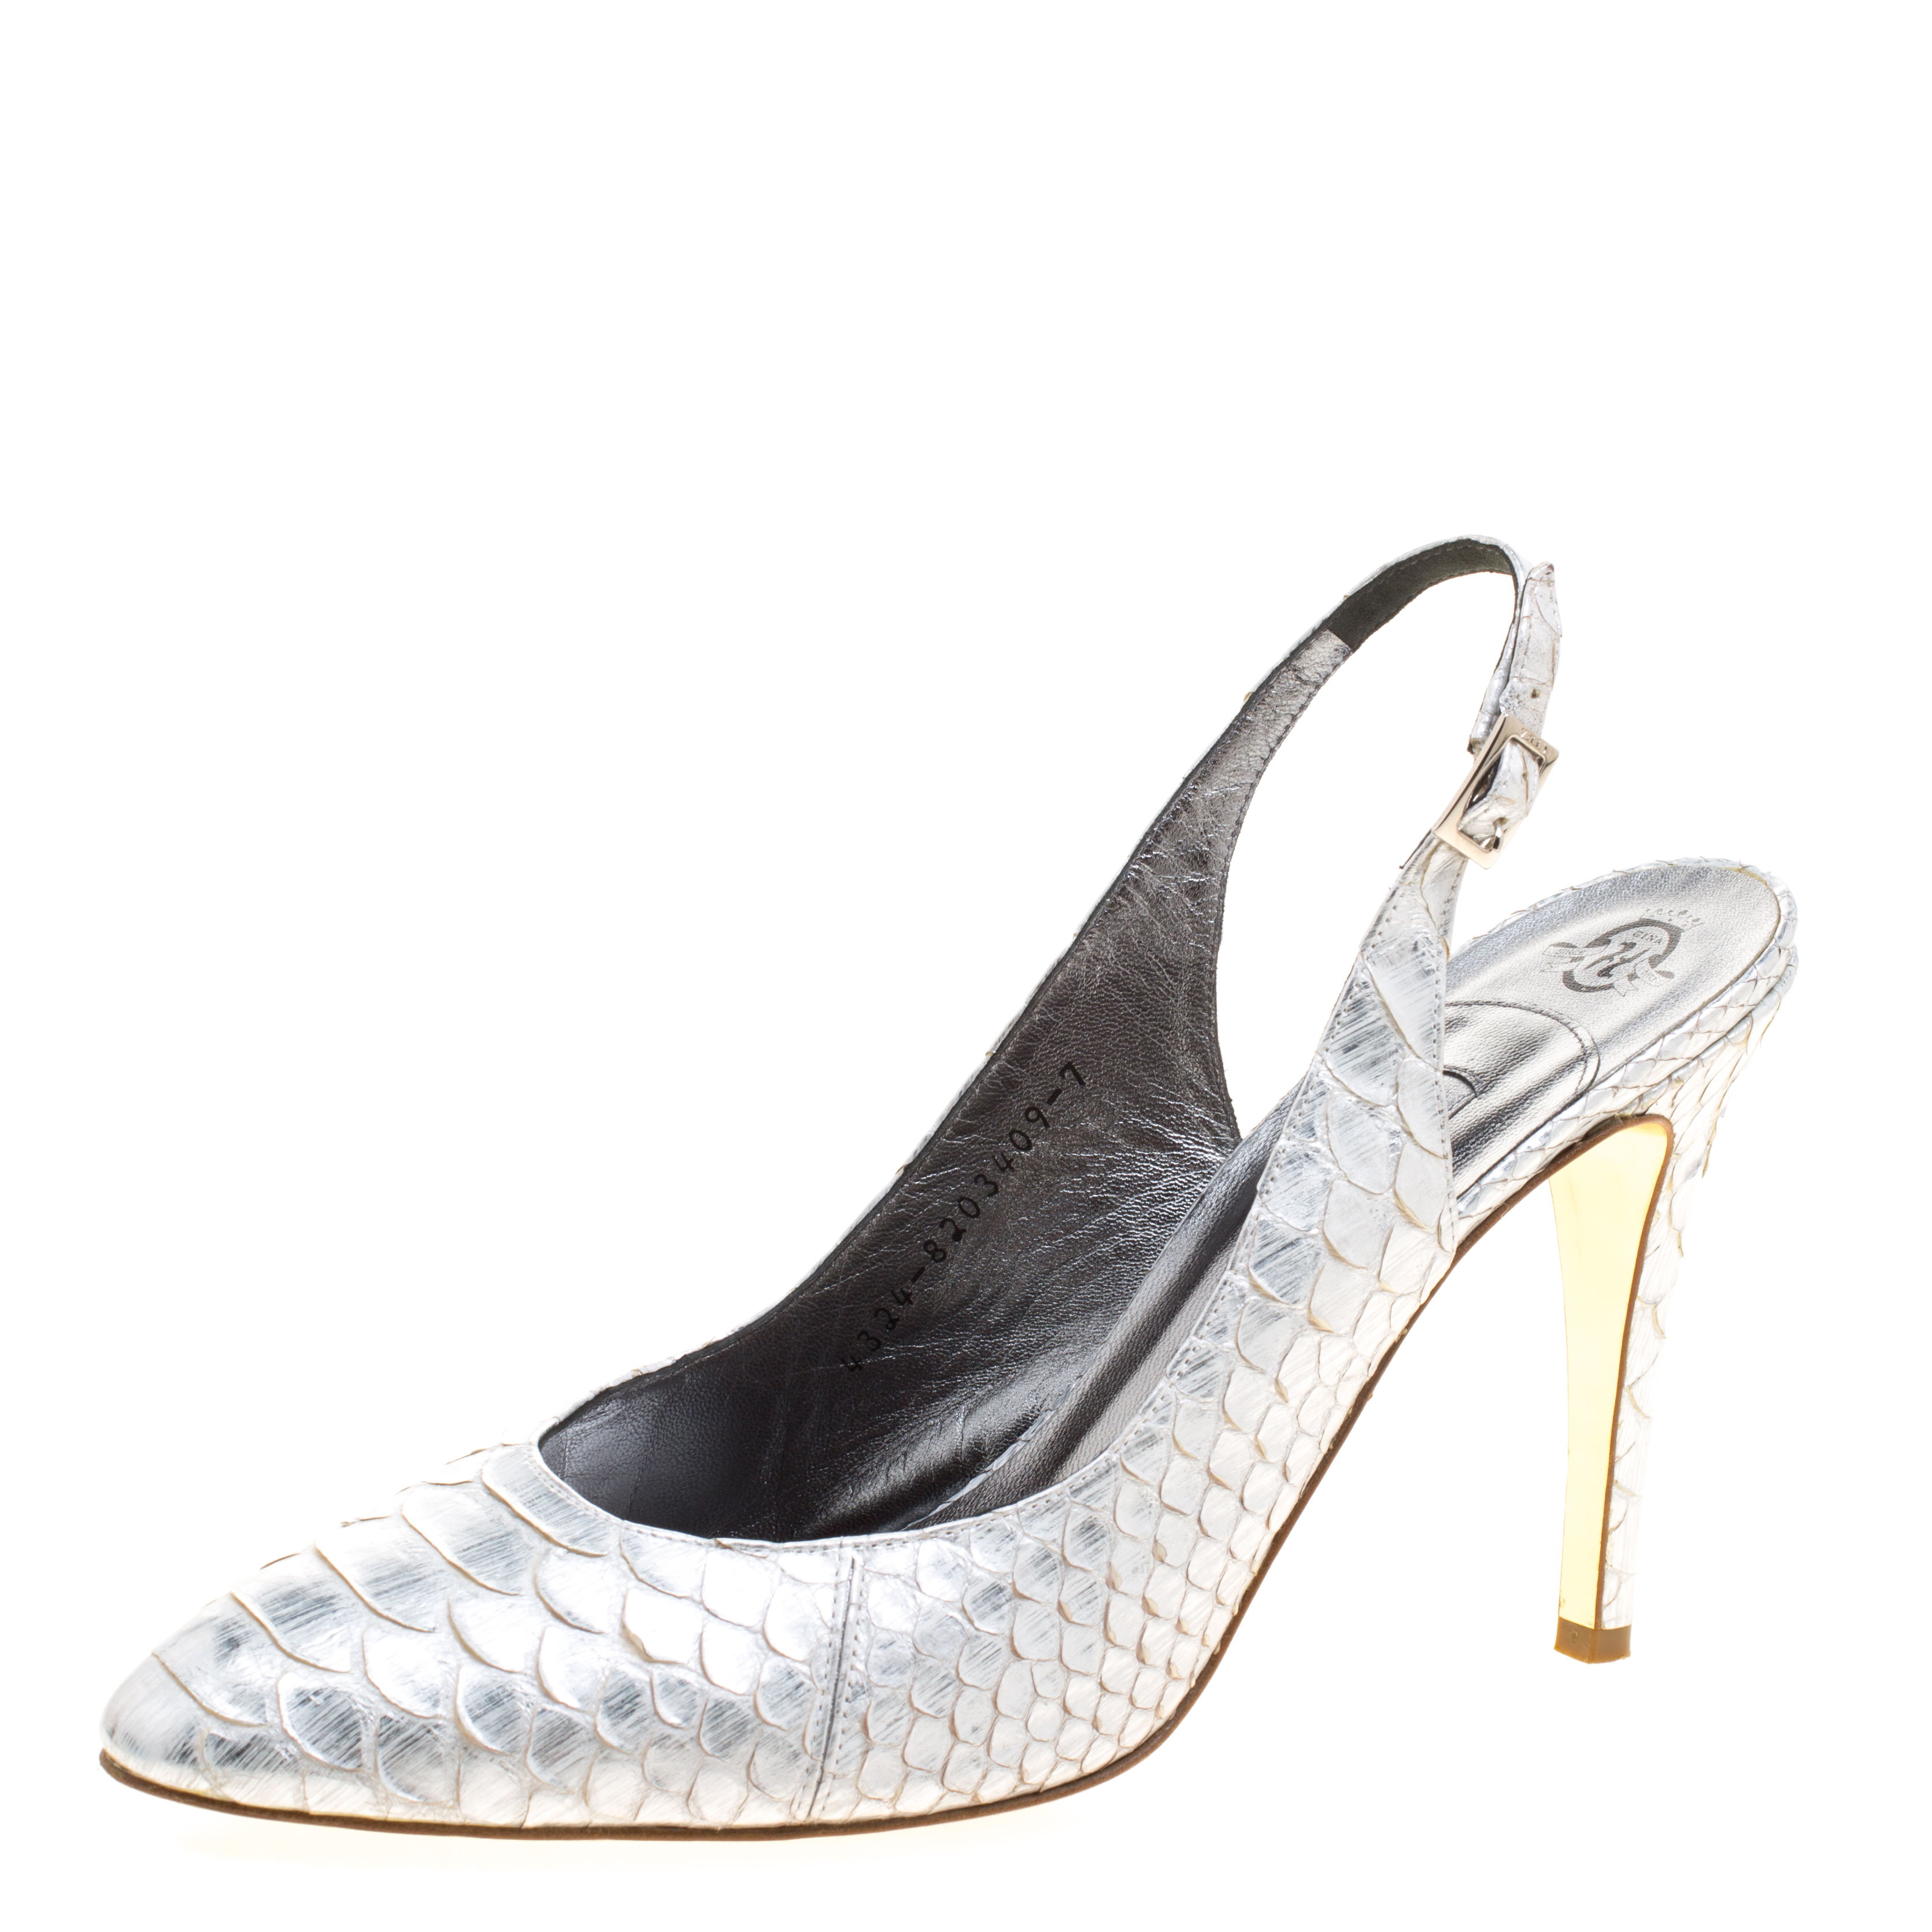 Tthe perfect accessory for your gorgeous dress and you walk into the party or into the club. Crafted from soft and quality leather and featuring scale detailing all over the body these shoes come equipped with high stiletto heels. The leather padded insoles are a comfortable fit and feature Gina logos.